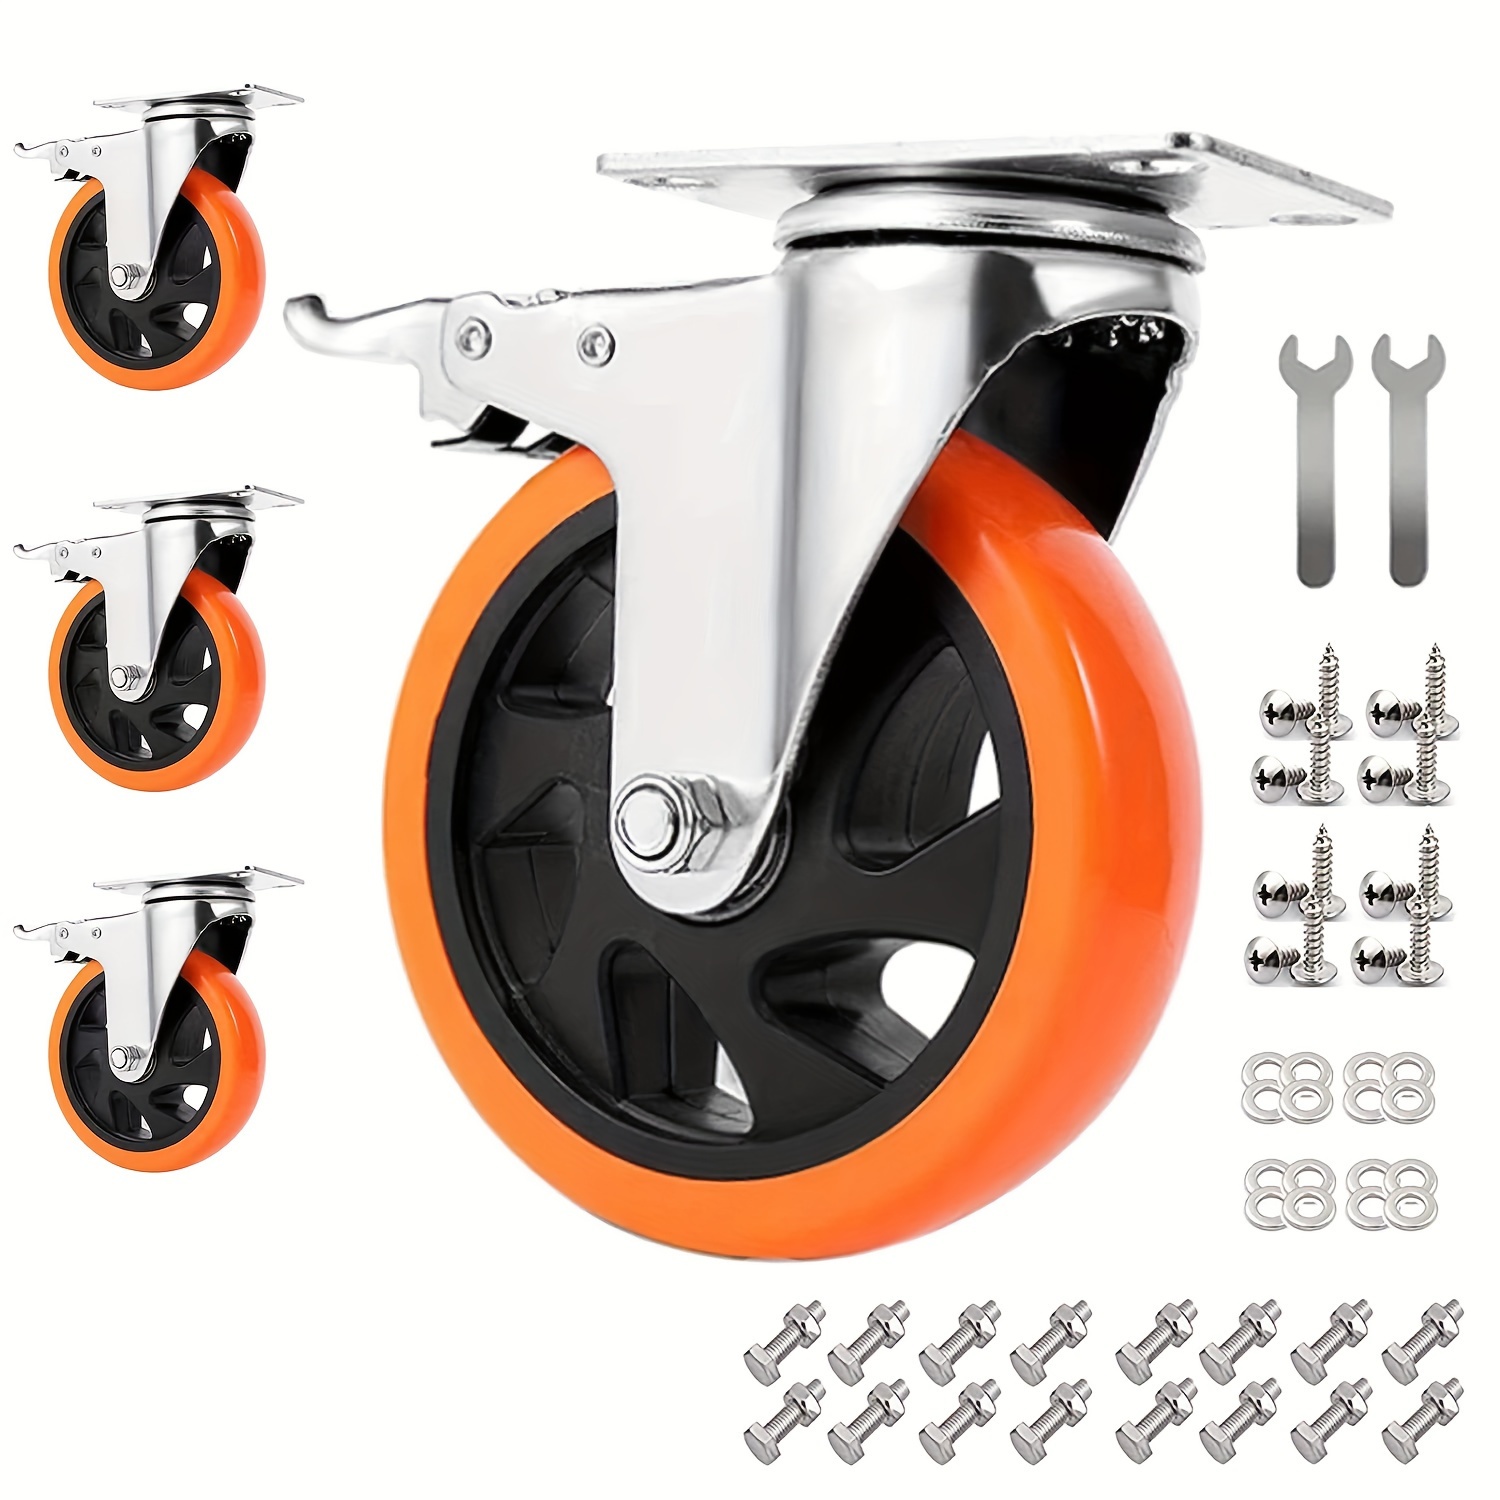 

4pcs/set Enyke 5-inch Heavy-duty Casters, Orange Swivel Wheels For Carts, Furniture, Workbenches, Smooth & Silent Motion (accessories Included)